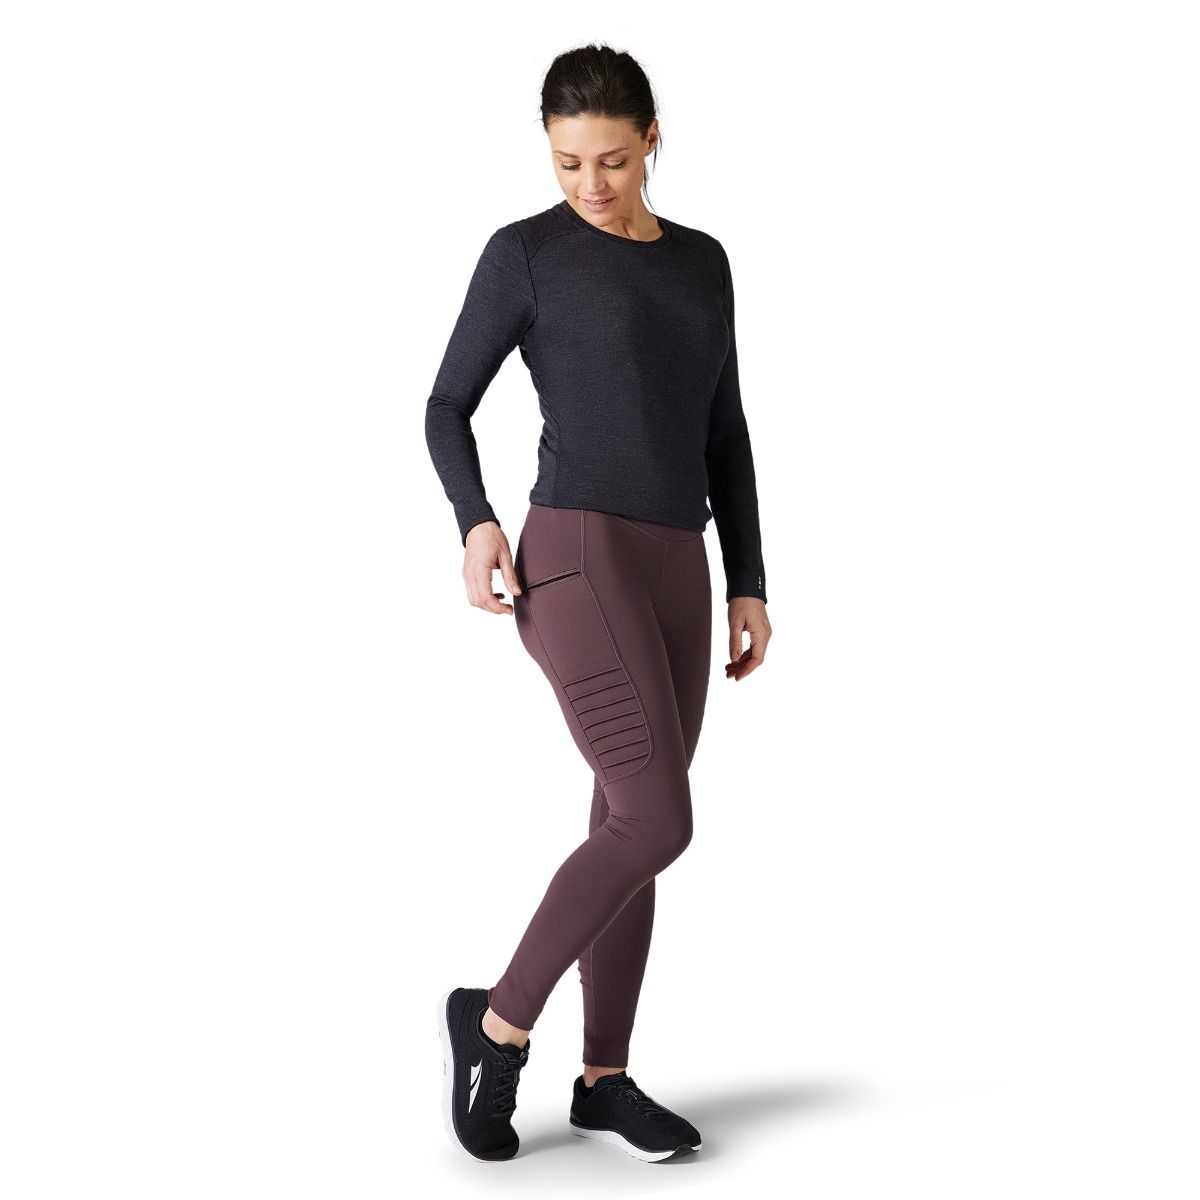 W Sport Moto Leggings-northwoo Woods - Welcome to Apple Saddlery |   | Family Owned Since 1972